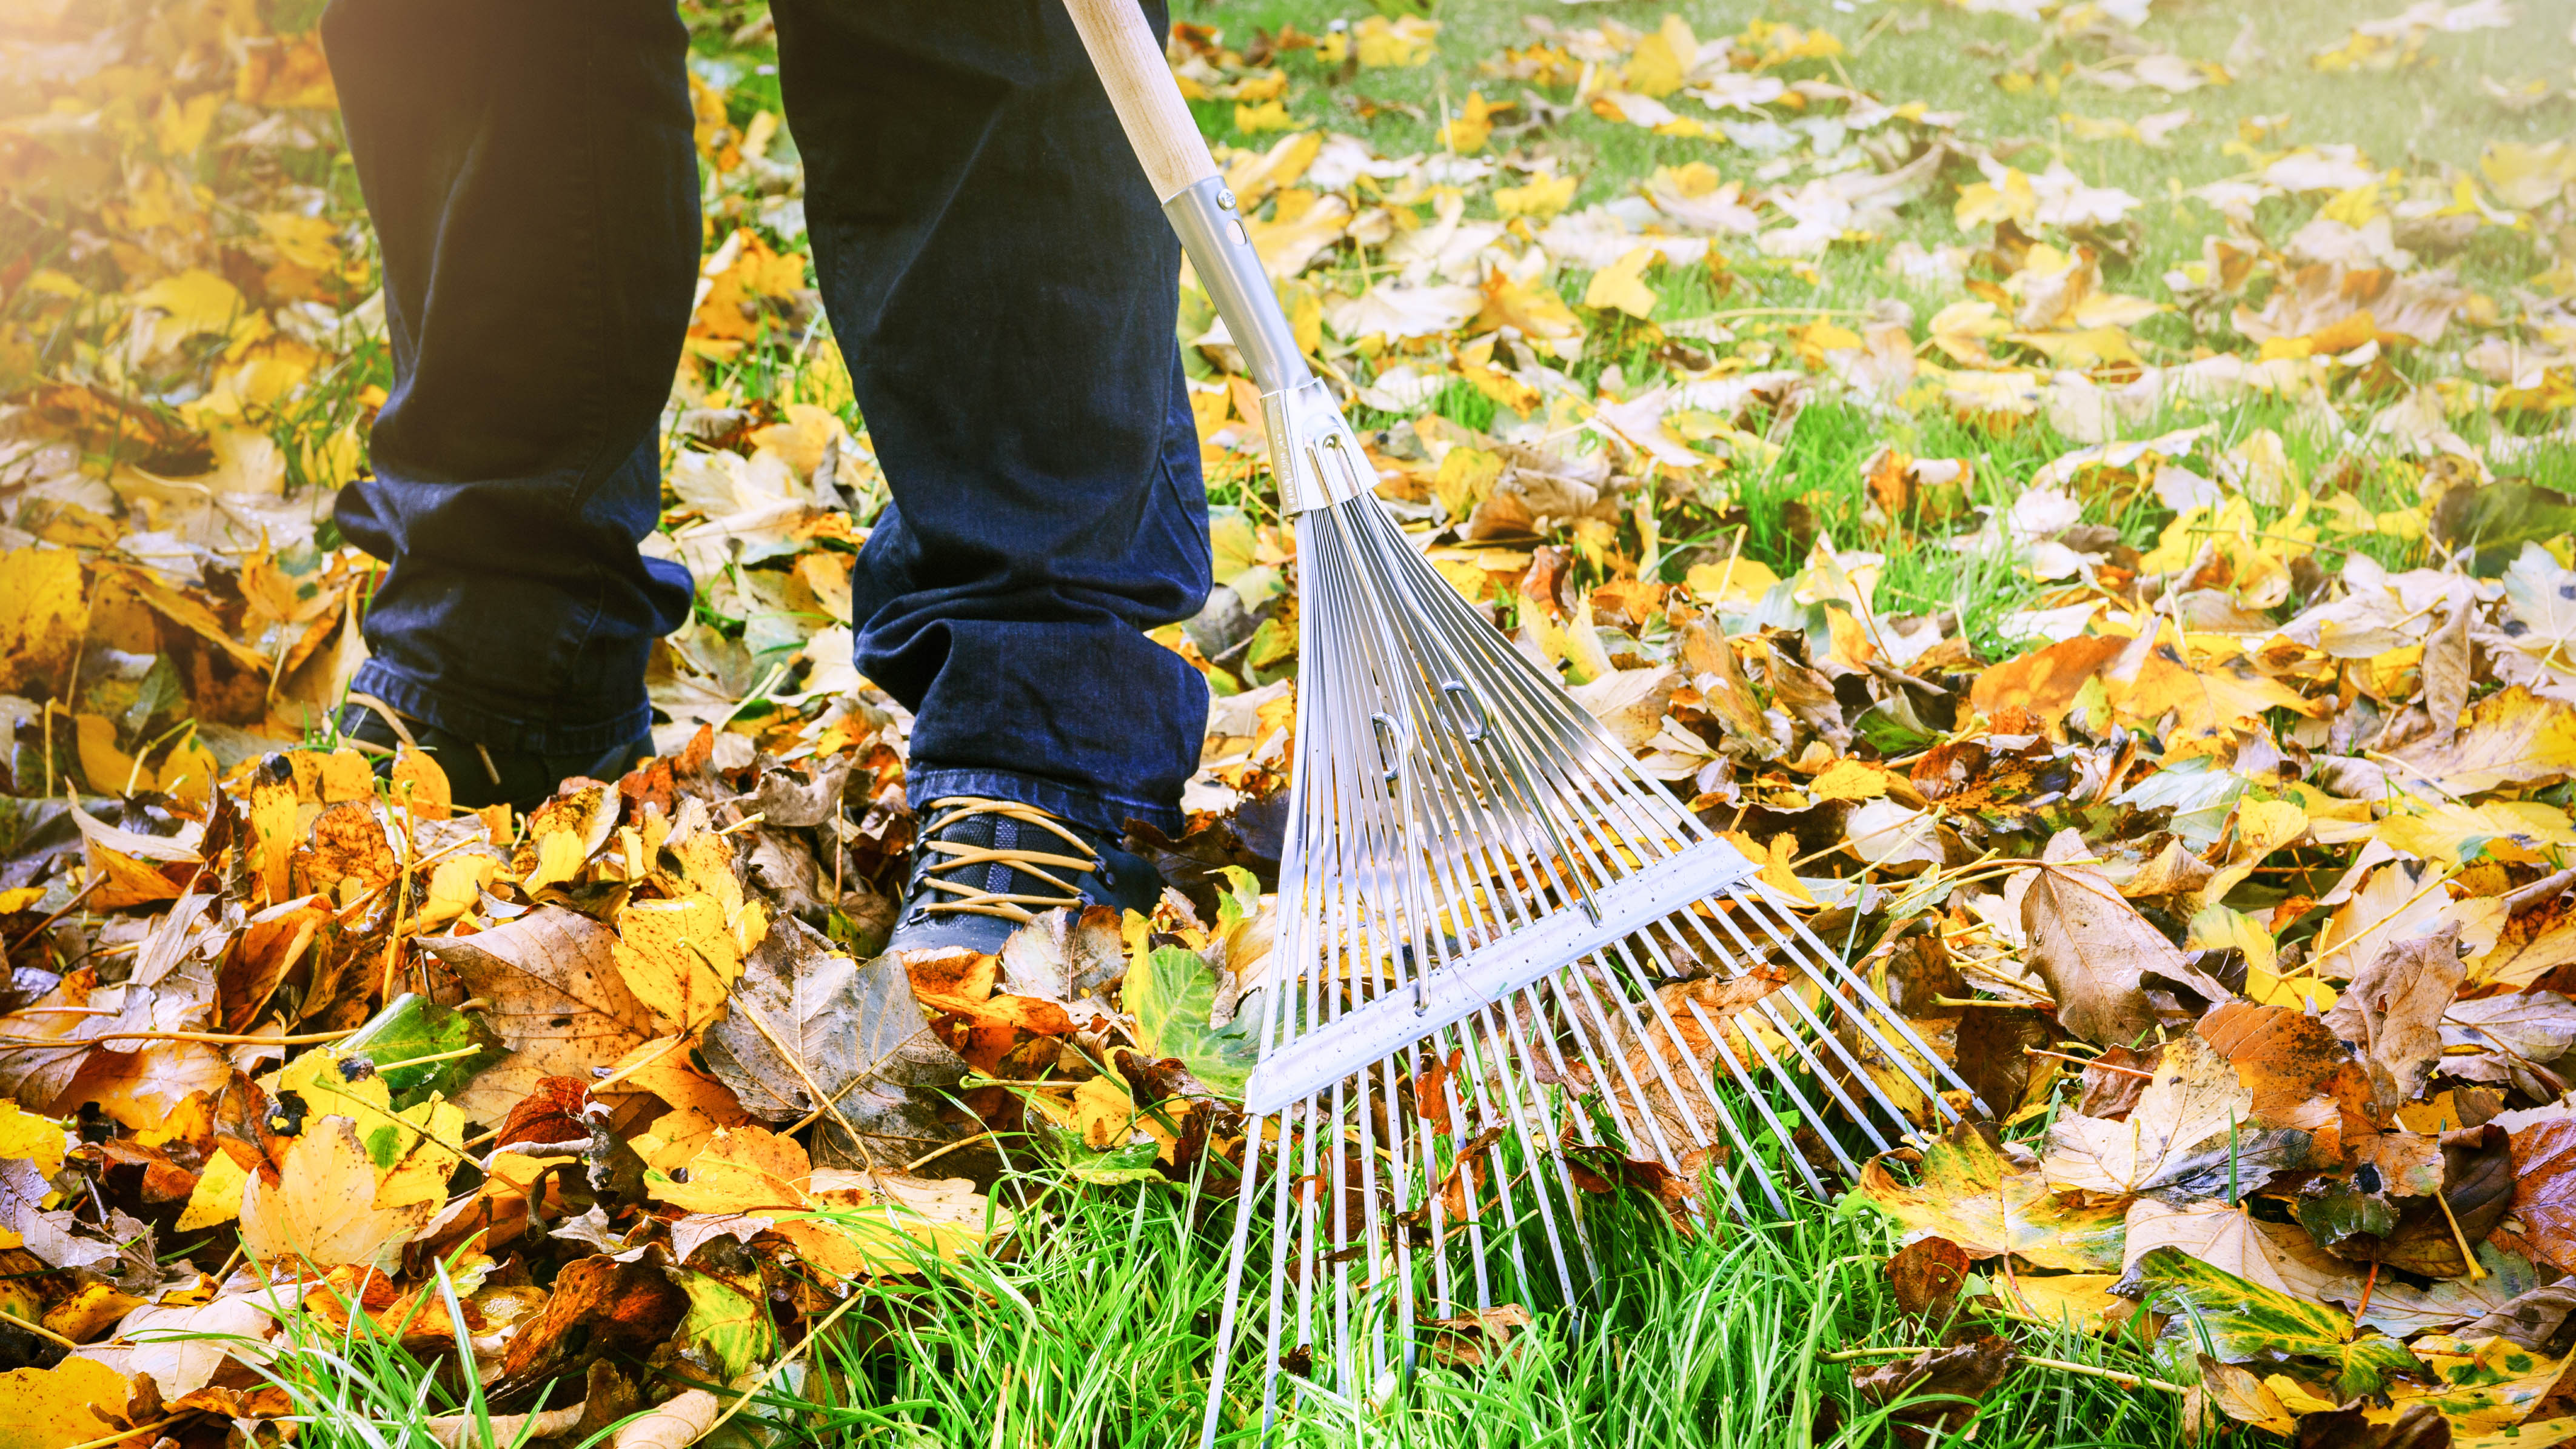 Rake the leaves on the lawn